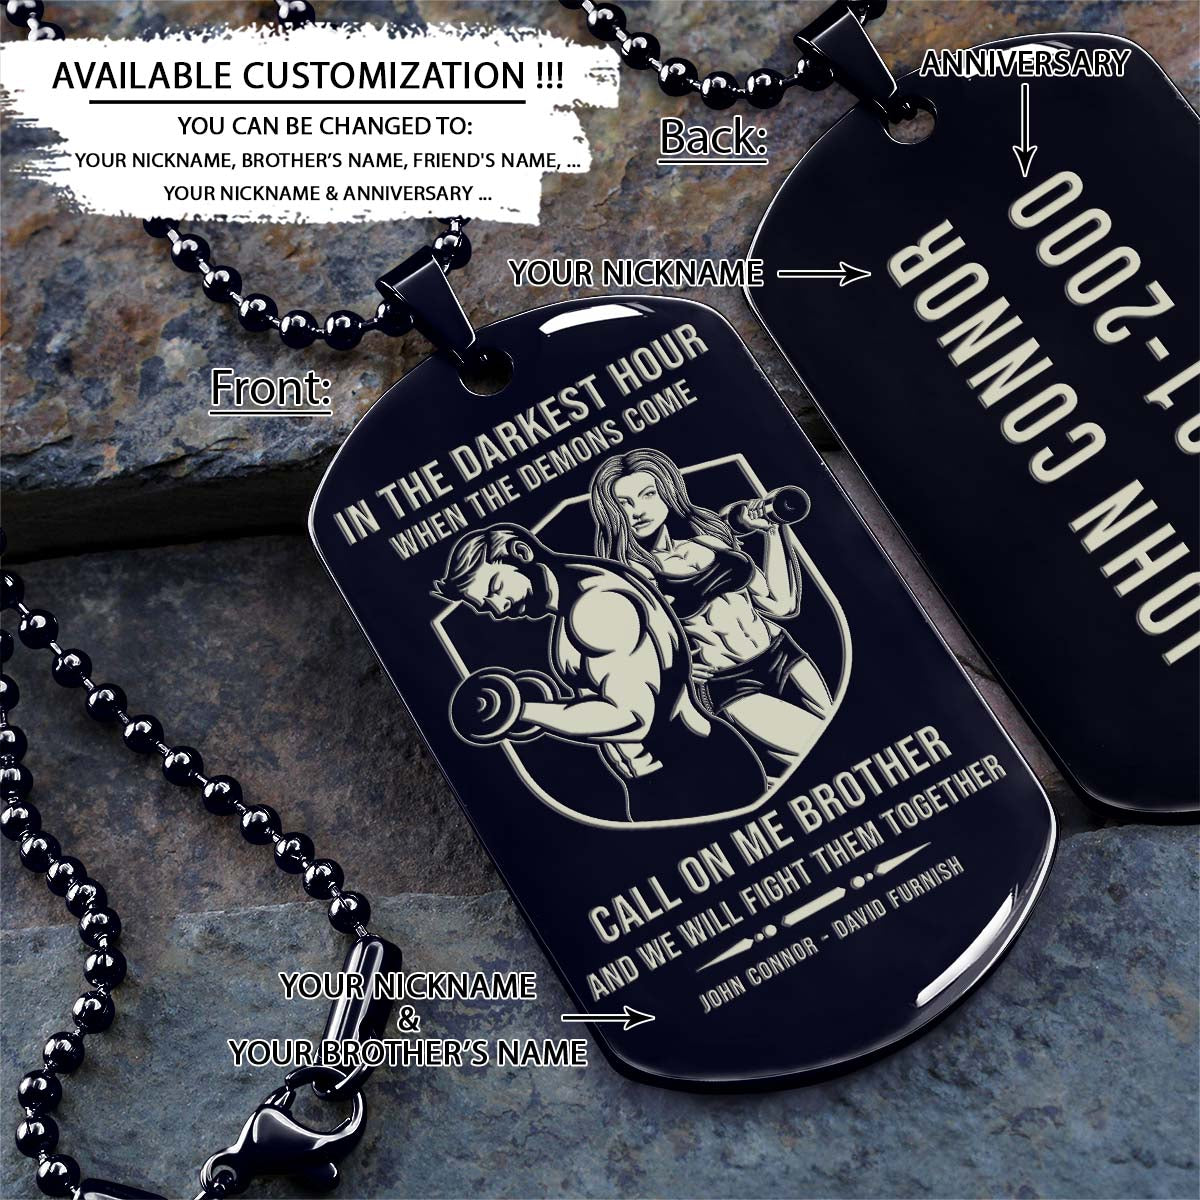 GYMD002 - Call On Me Brother - Gym - Fitness Center - Workout - Gym Dog Tag - Gym Necklace - Black Engrave Dog Tag